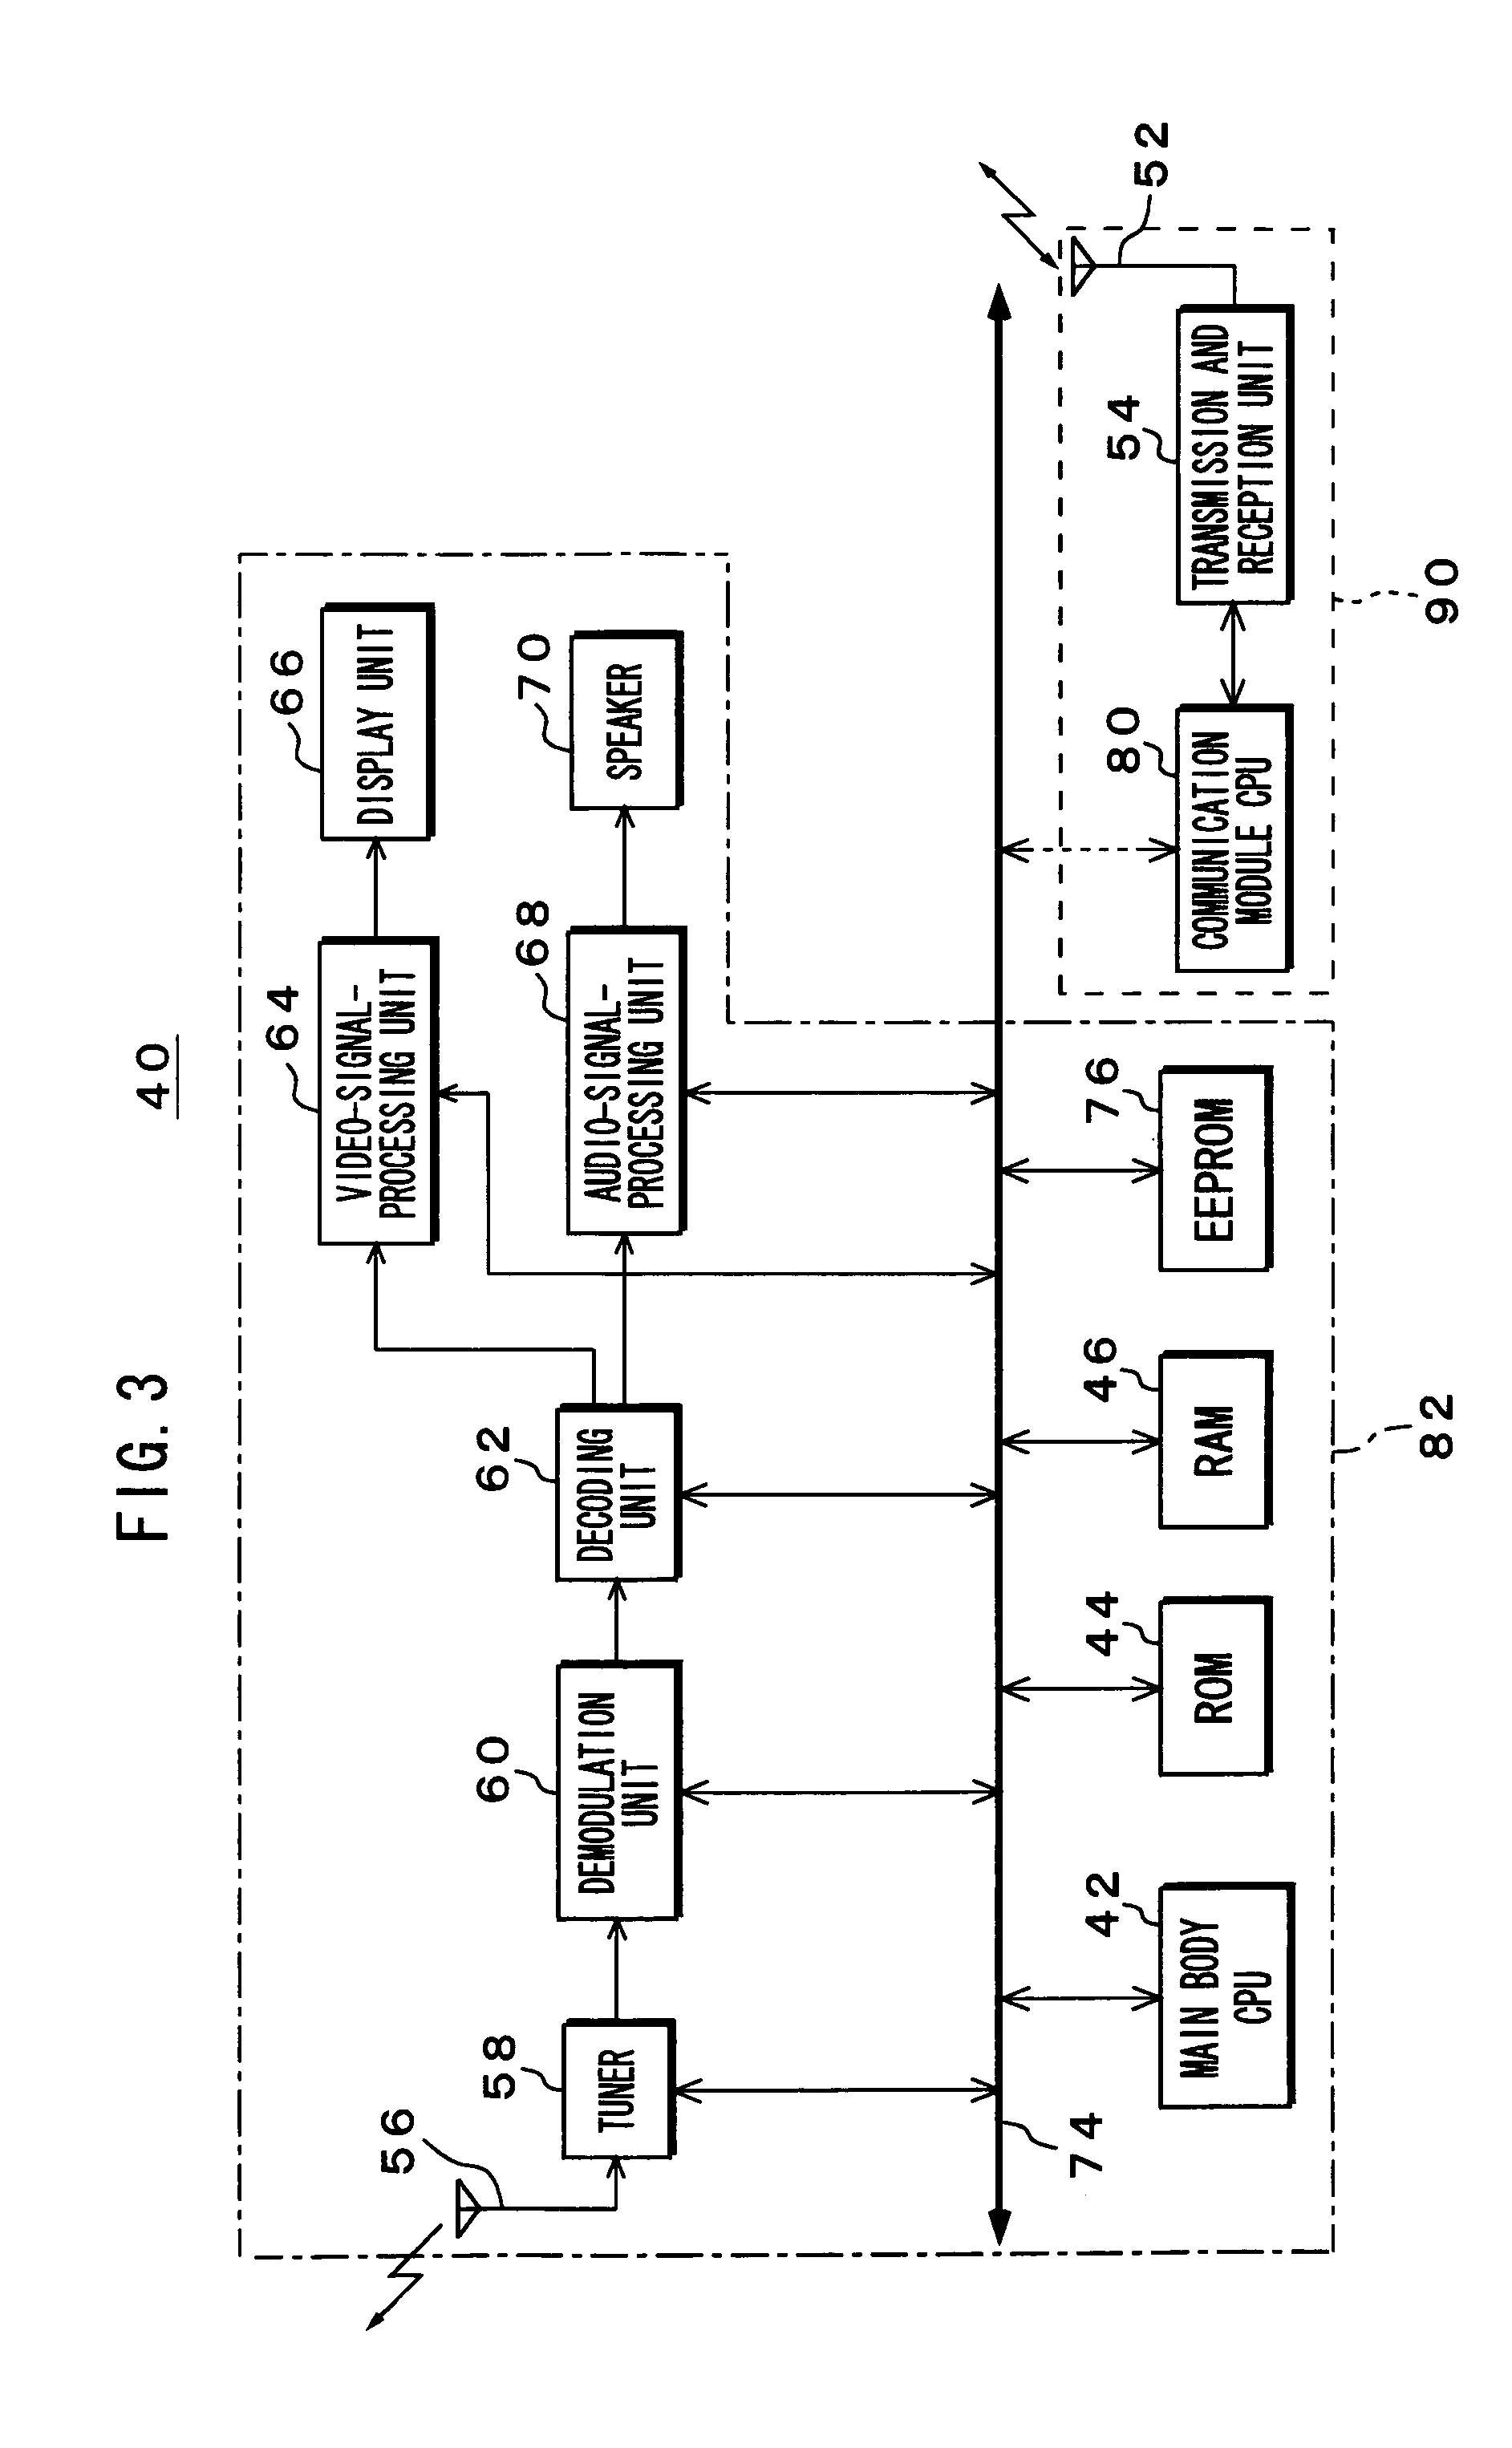 Electronic apparatus, remote controller and remote control system